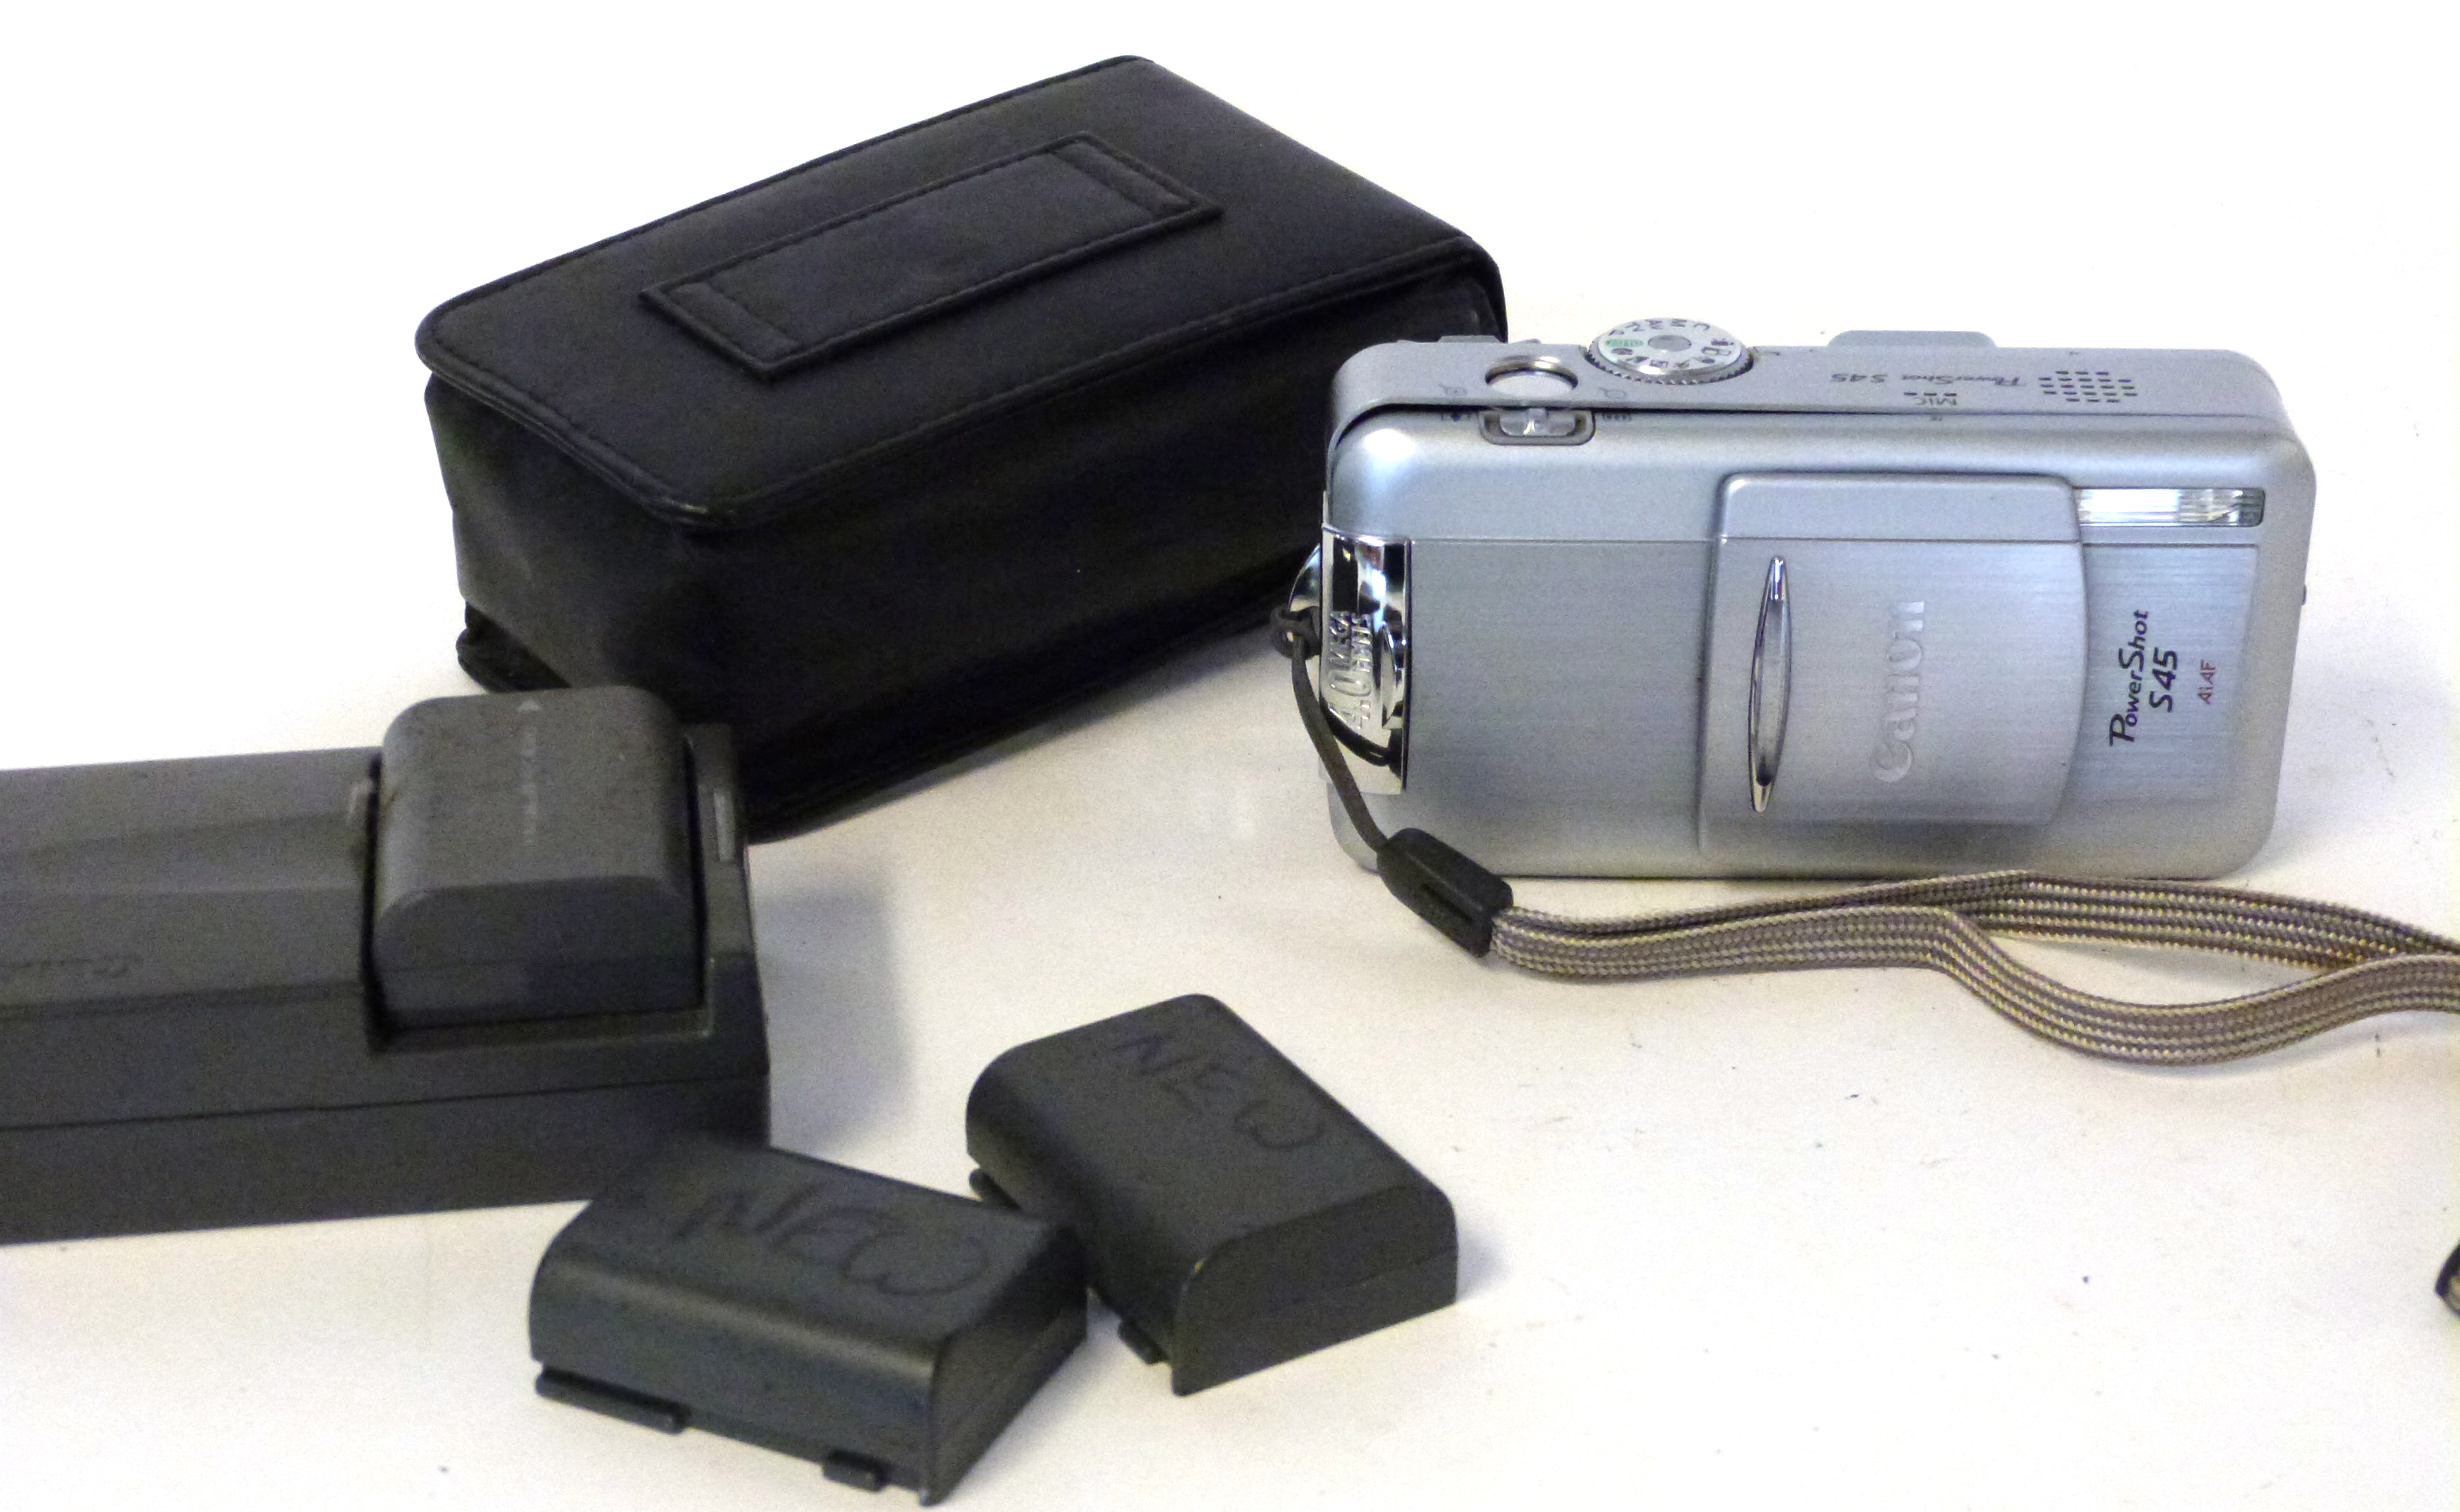 Canon Powershot S45 plus charger and case - Image 2 of 4